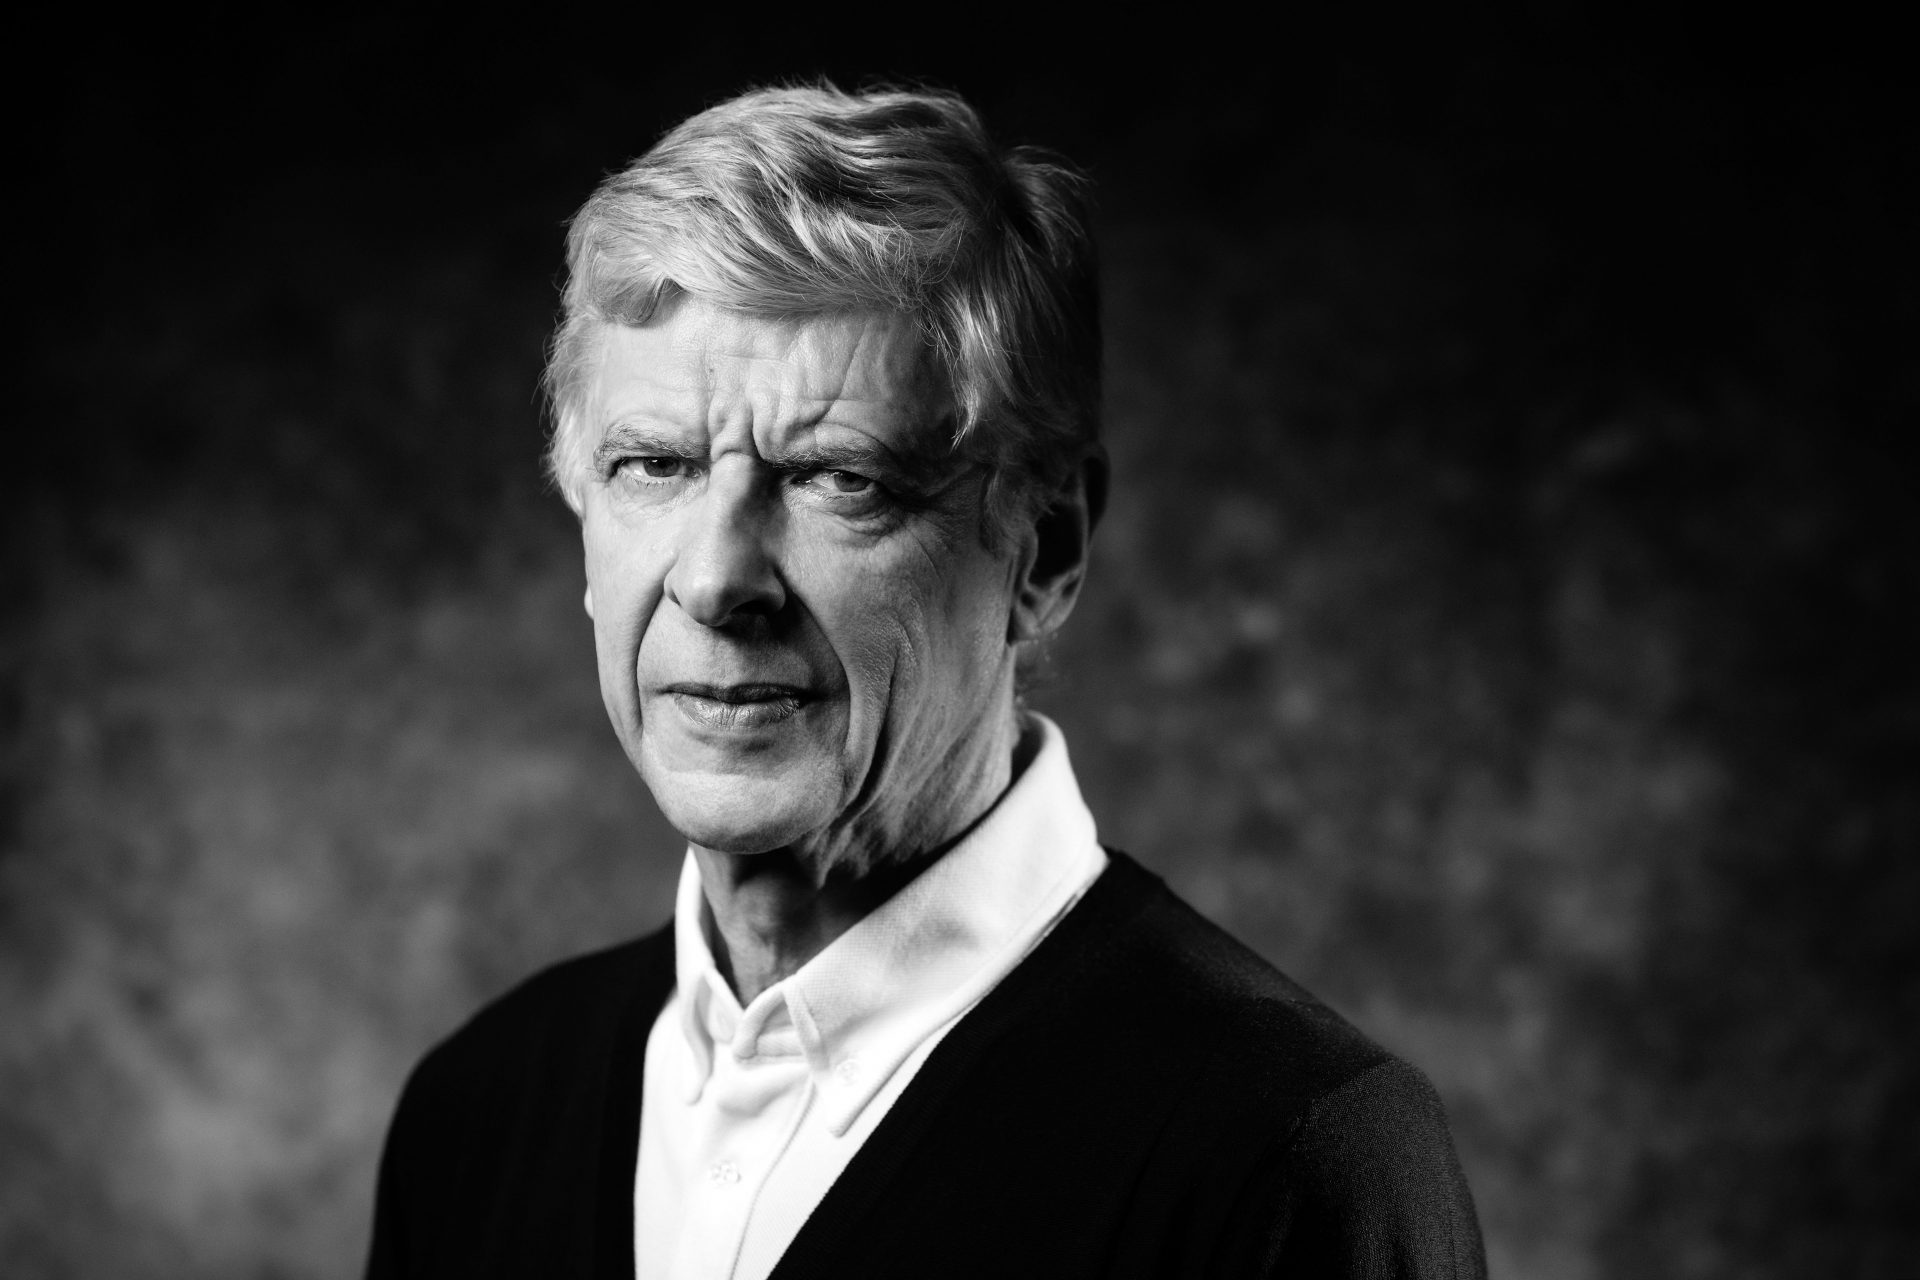 Former Arsenal manager Arsene Wenger, now FIFA’s chief of global football development. Photo: Joel Saget/AFP via Getty Images